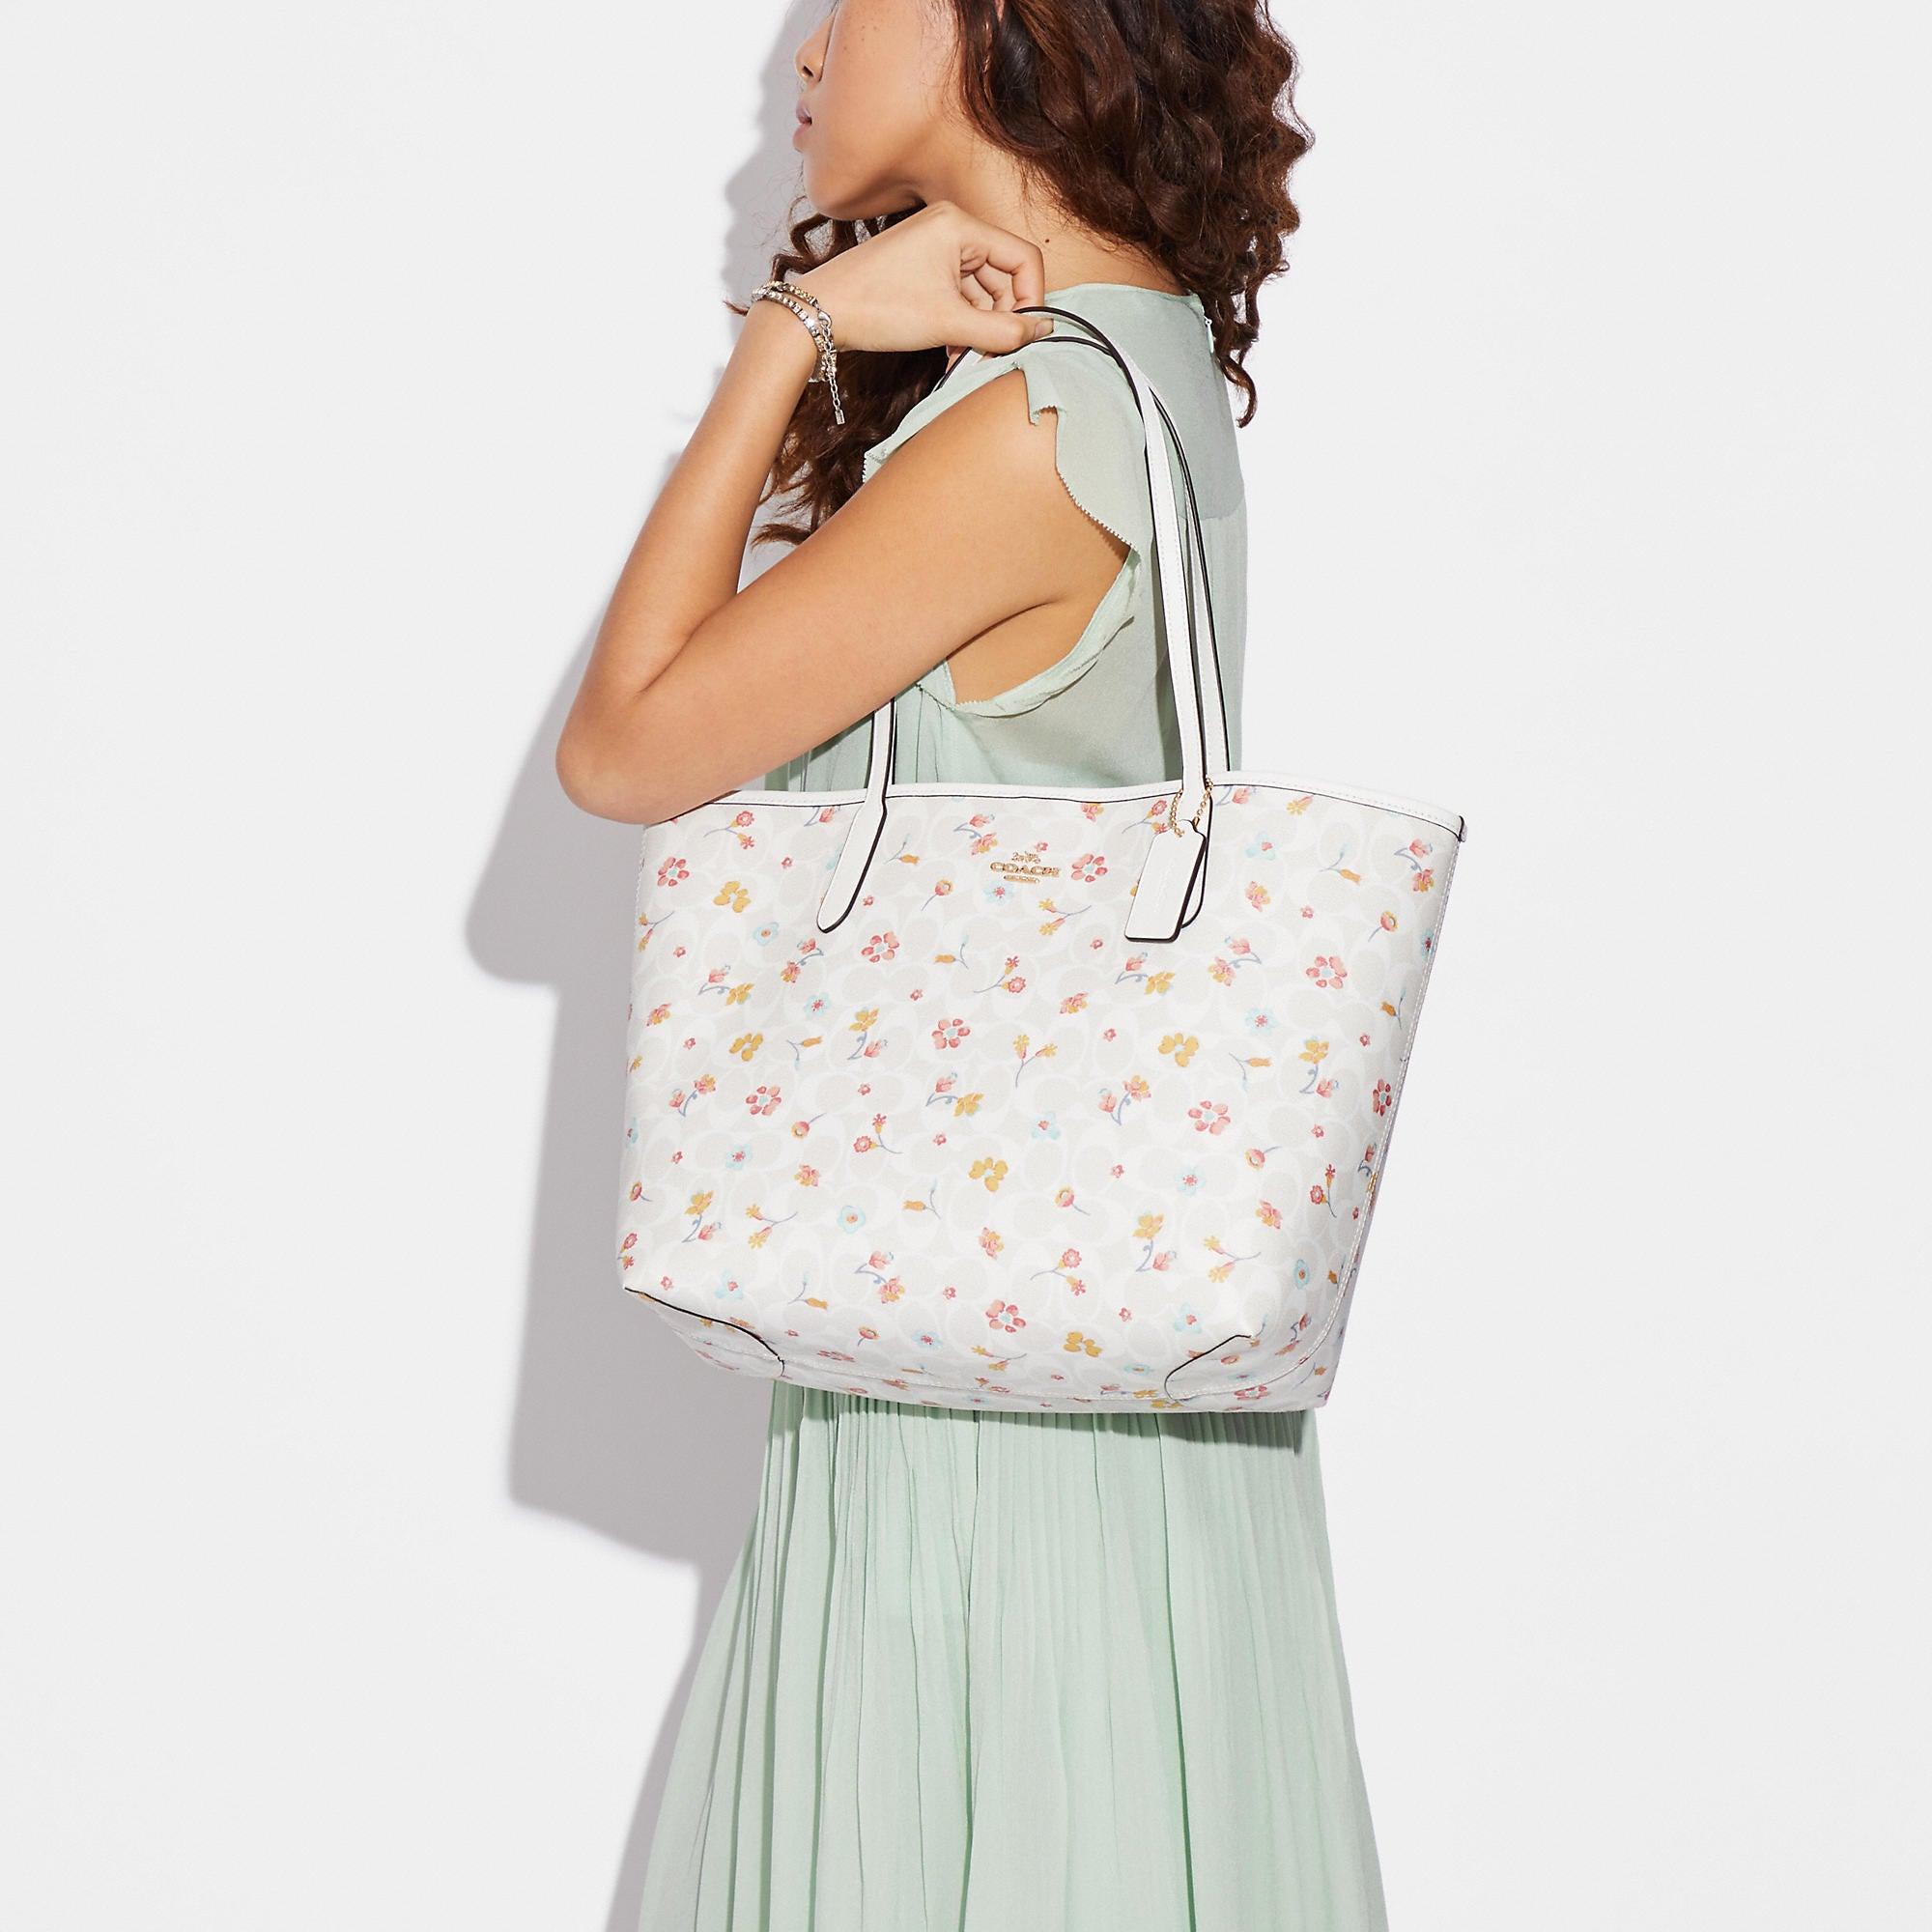 Coach Women's City Tote in Printed Coated Canvas